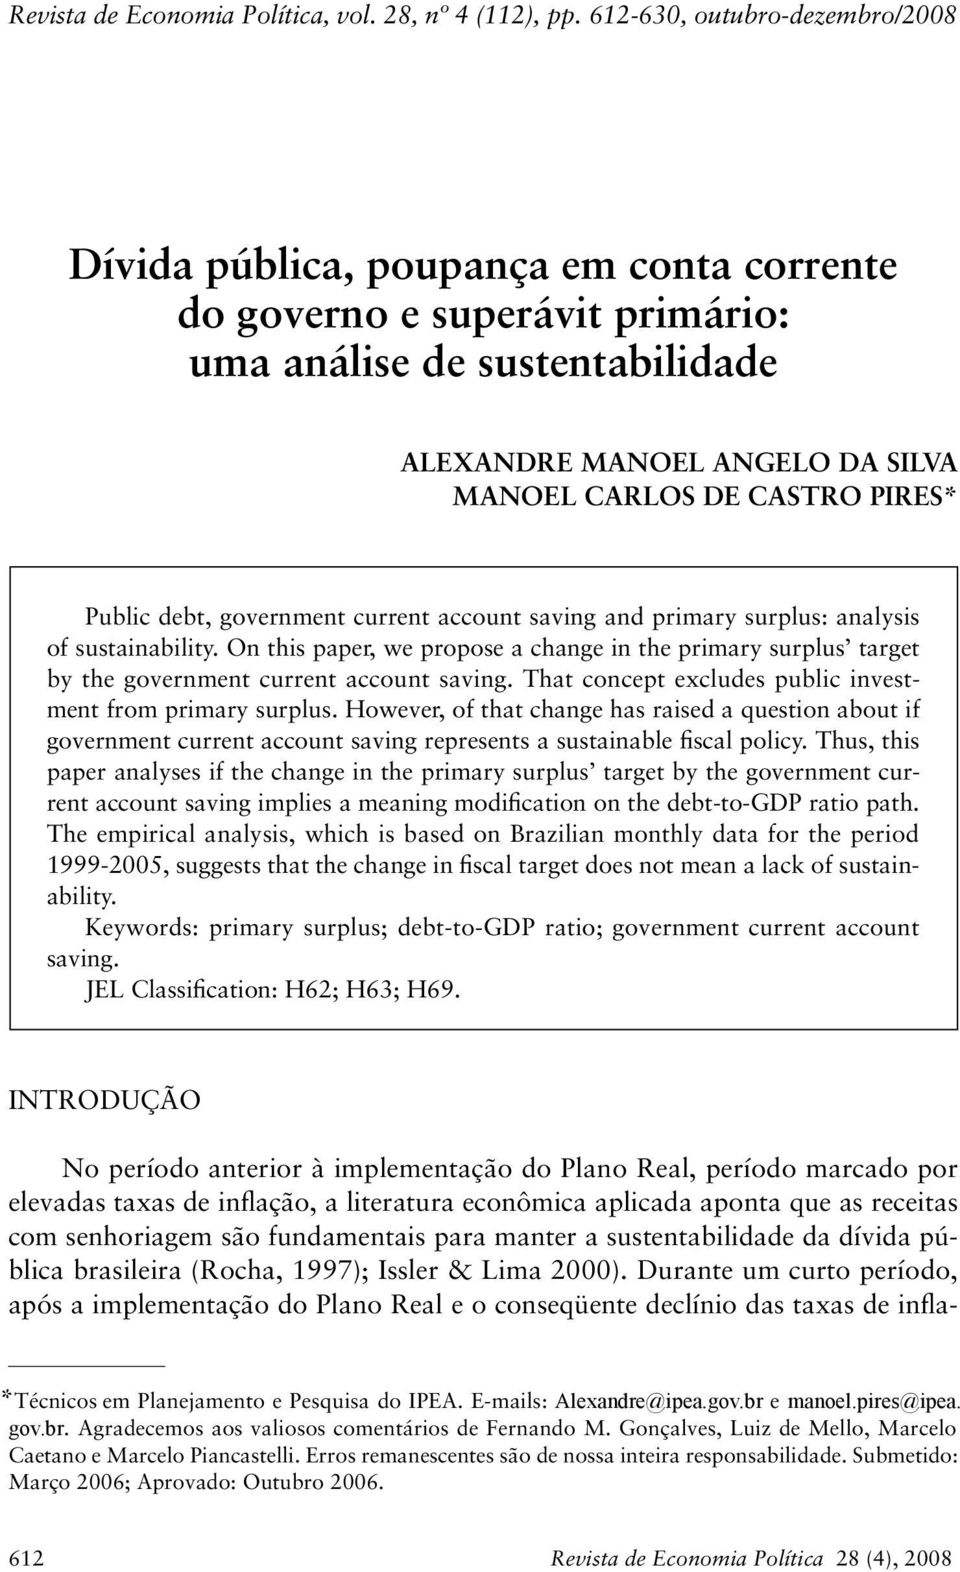 Public deb, governmen curren accoun saving and primary surplus: analysis of susainabiliy. On his paper, we propose a change in he primary surplus arge by he governmen curren accoun saving.